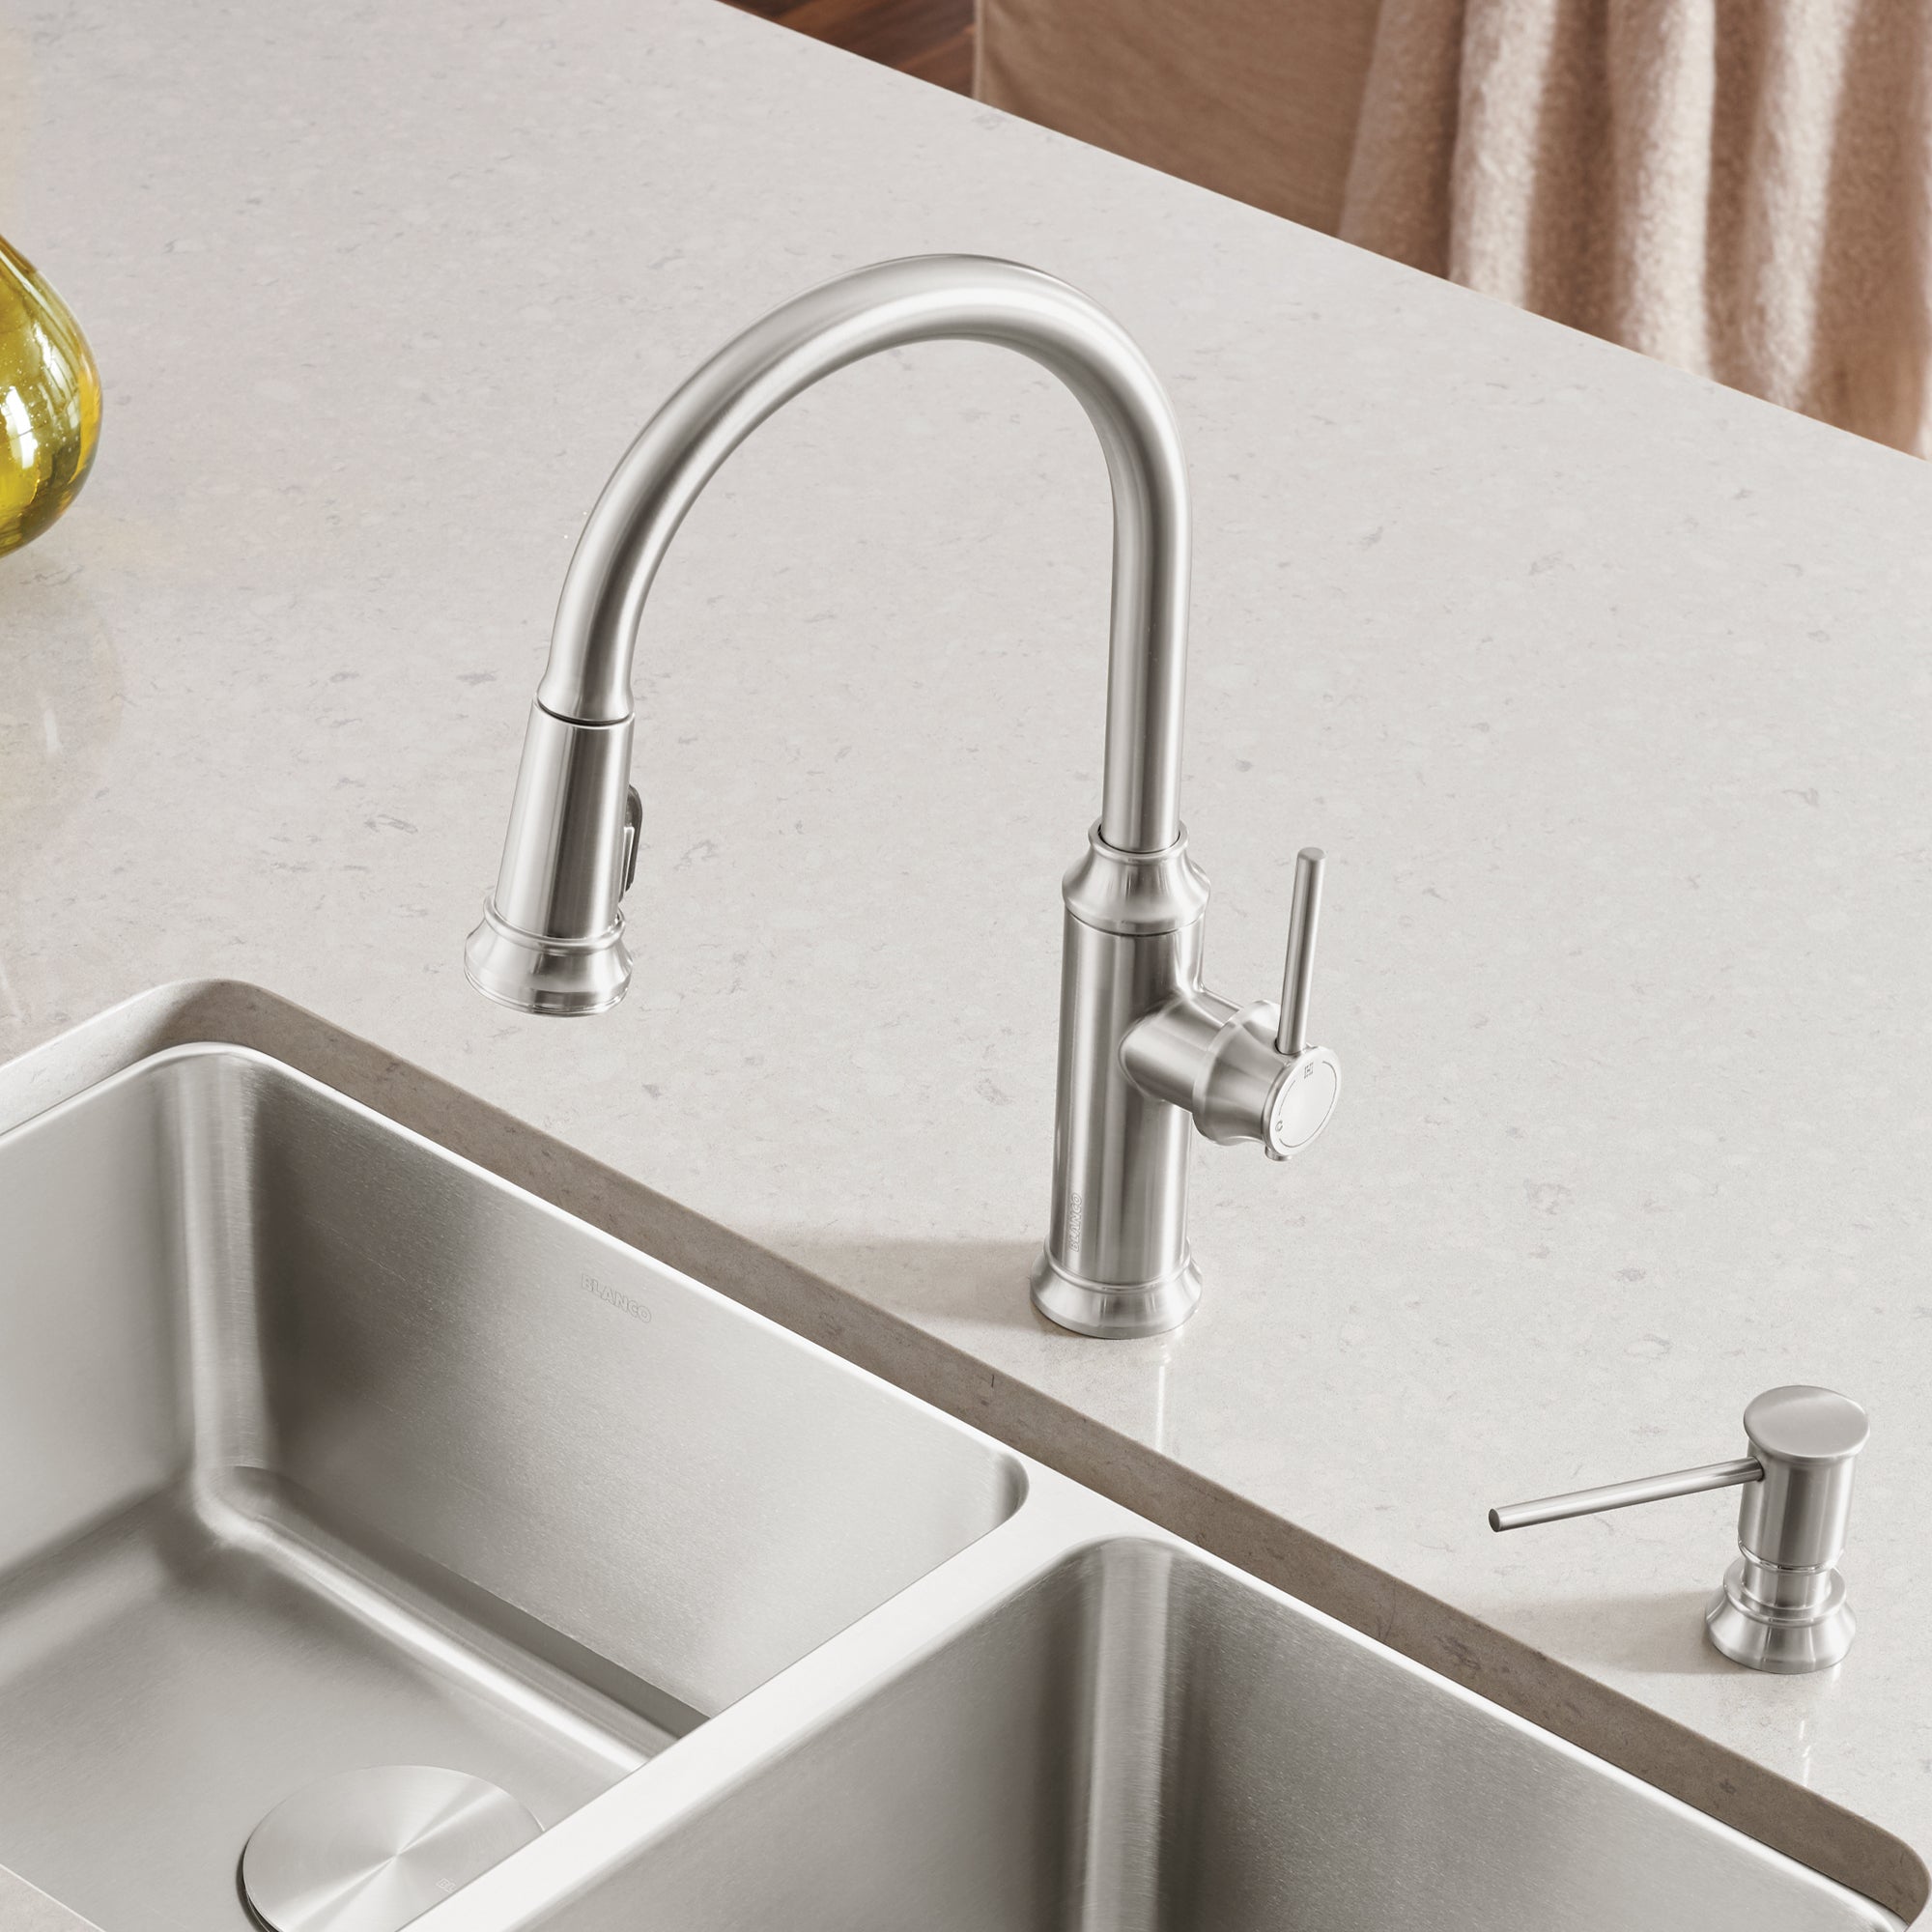 Blanco 442500- EMPRESSA Pull-down High Arc Kitchen Faucet, Stainless Finish - FaucetExpress.ca